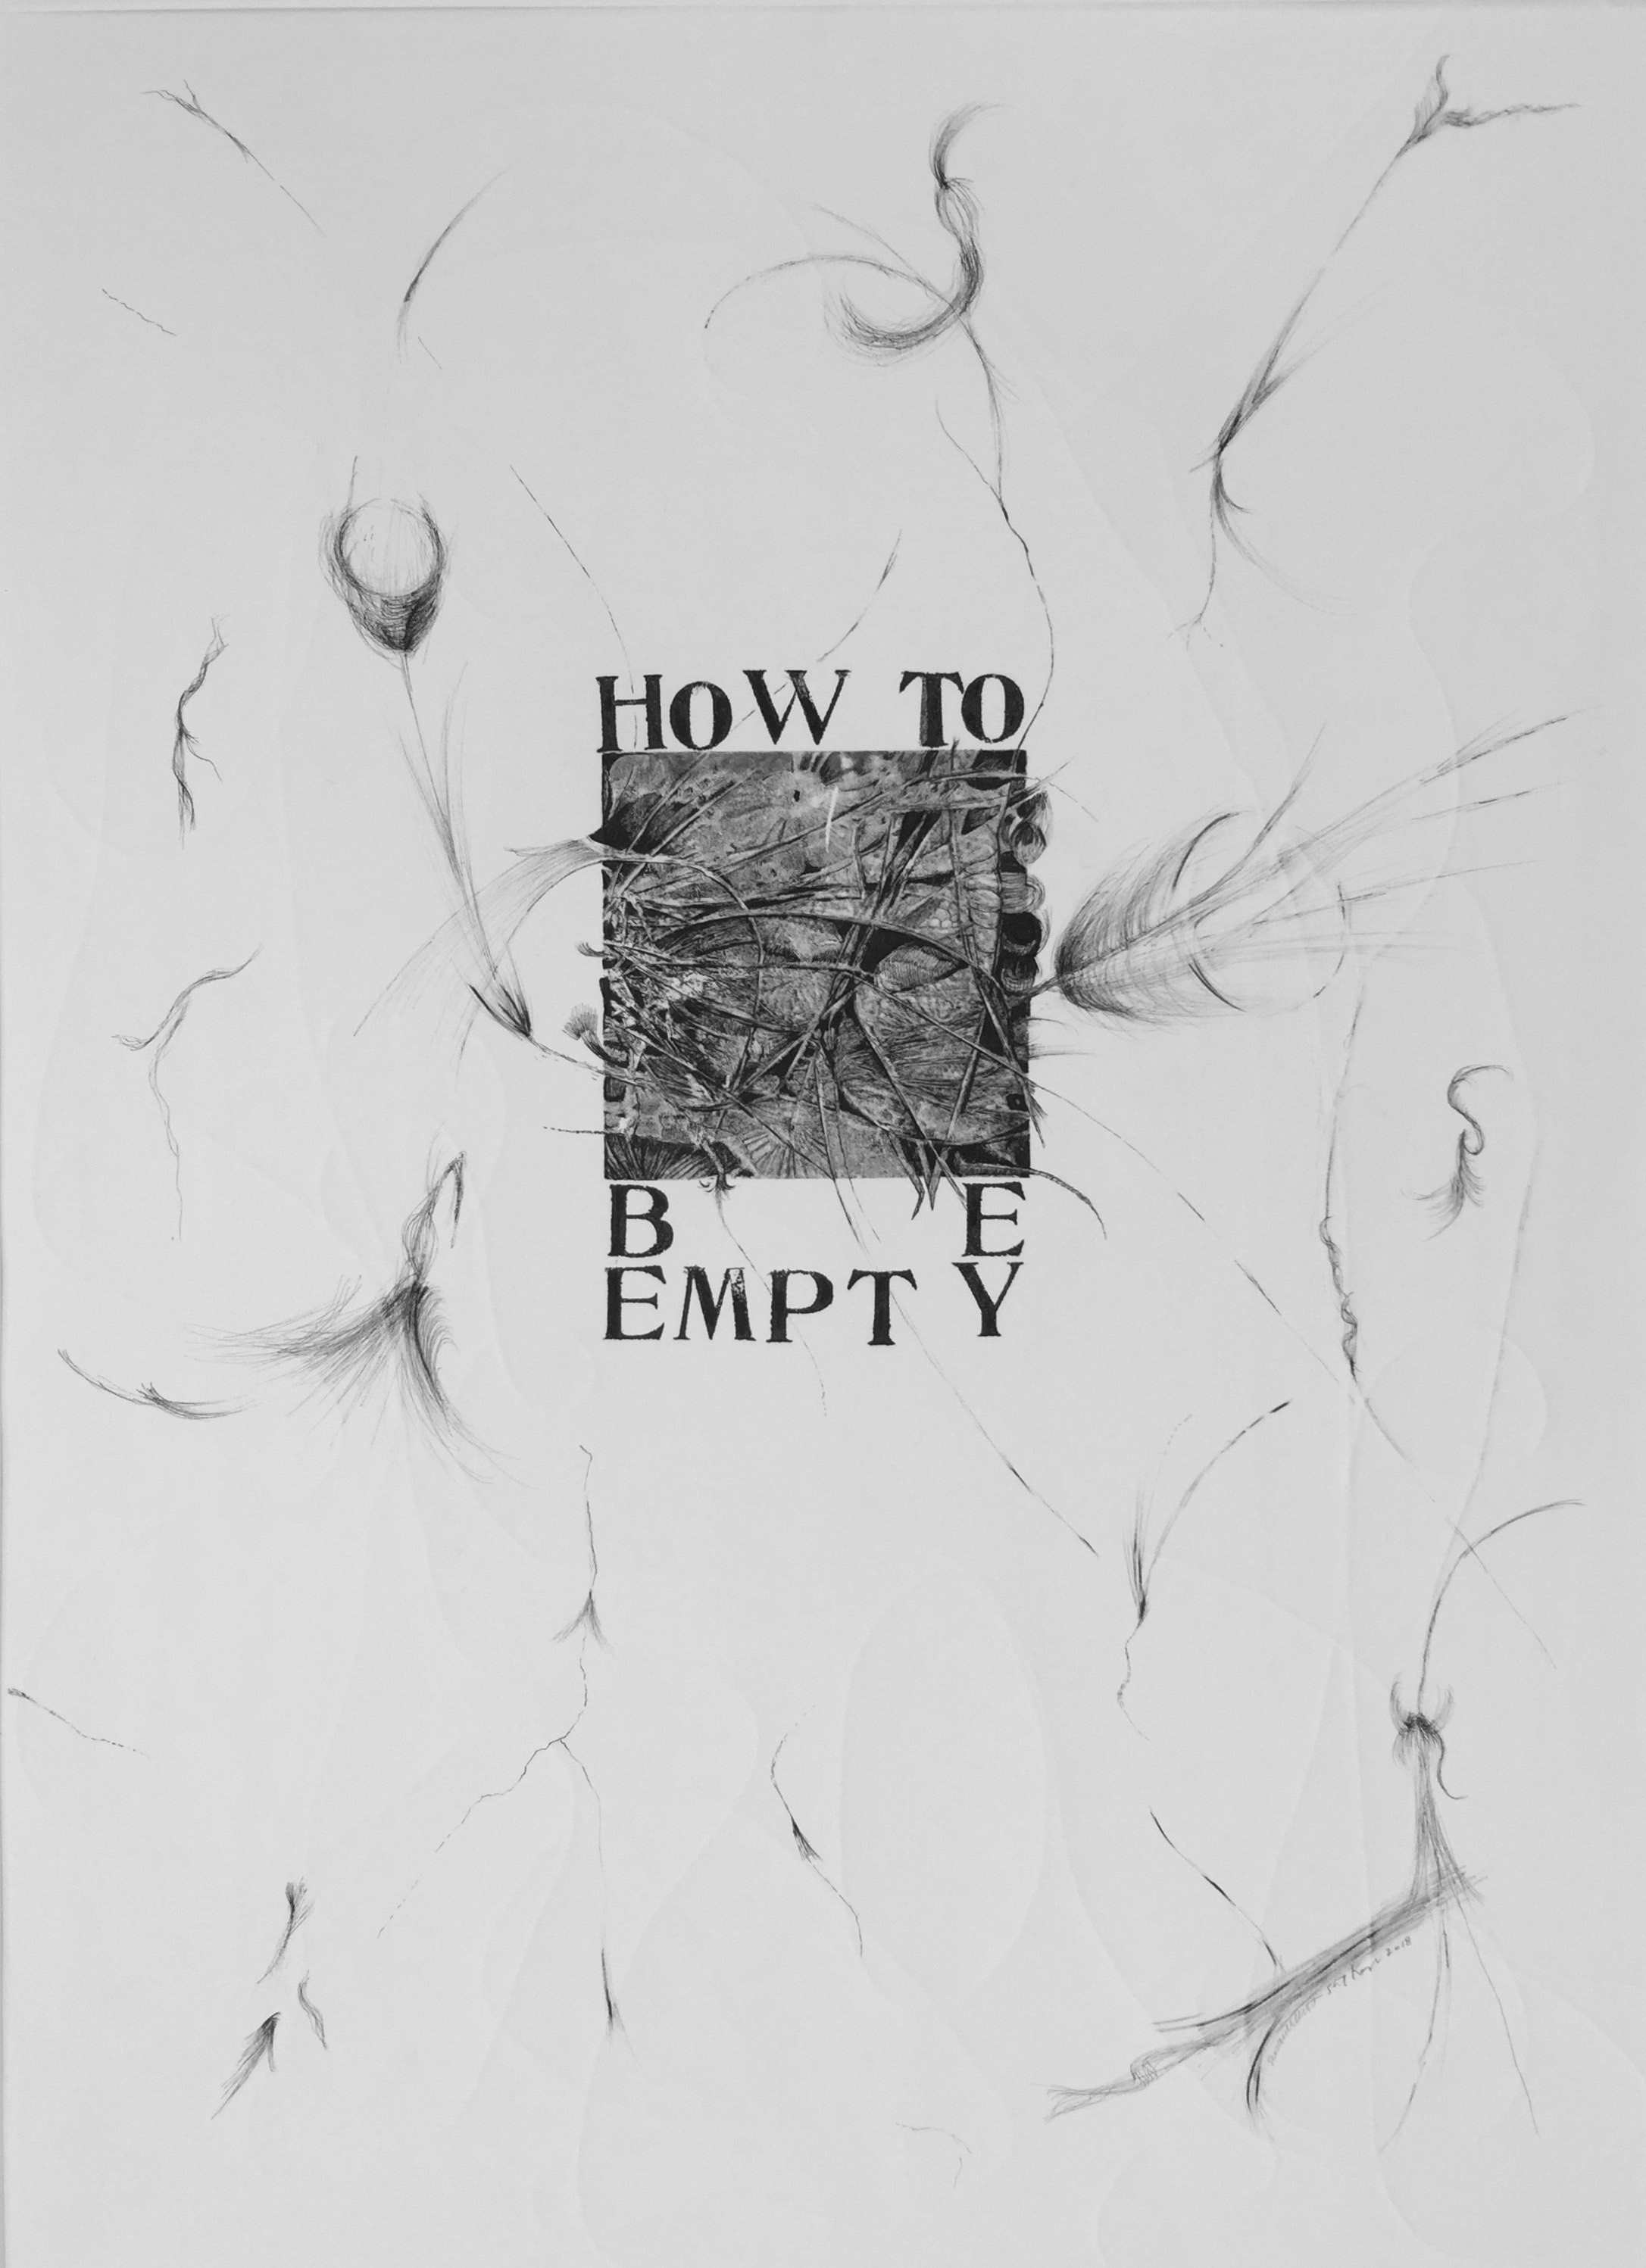   How to Be Empty   23 x 30 inches  mixed media  image: Susan Webster   hand stamped text:Stuart Kestenbaum   2018 